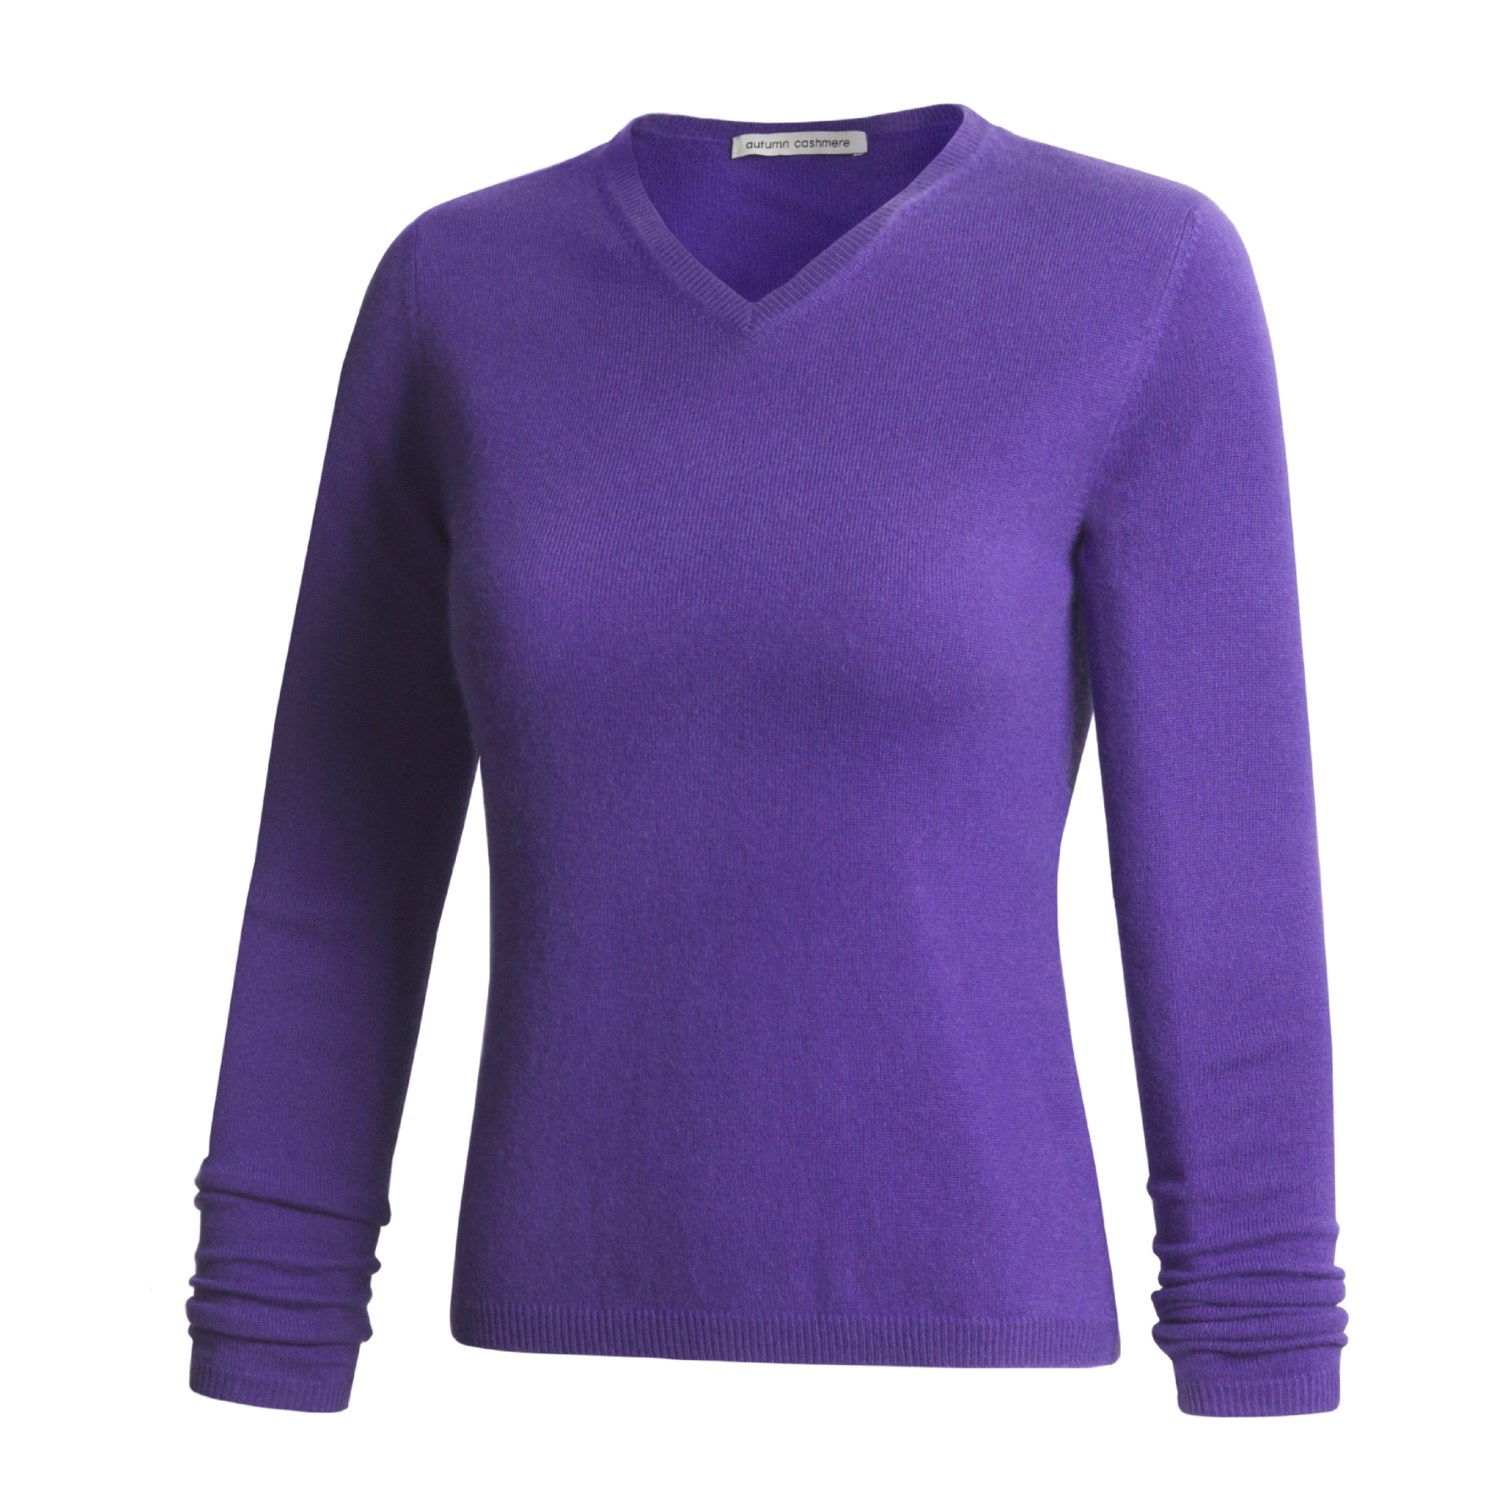 Autumn Cashmere Fitted V-Neck Sweater (For Women) 37816 - Save 70%